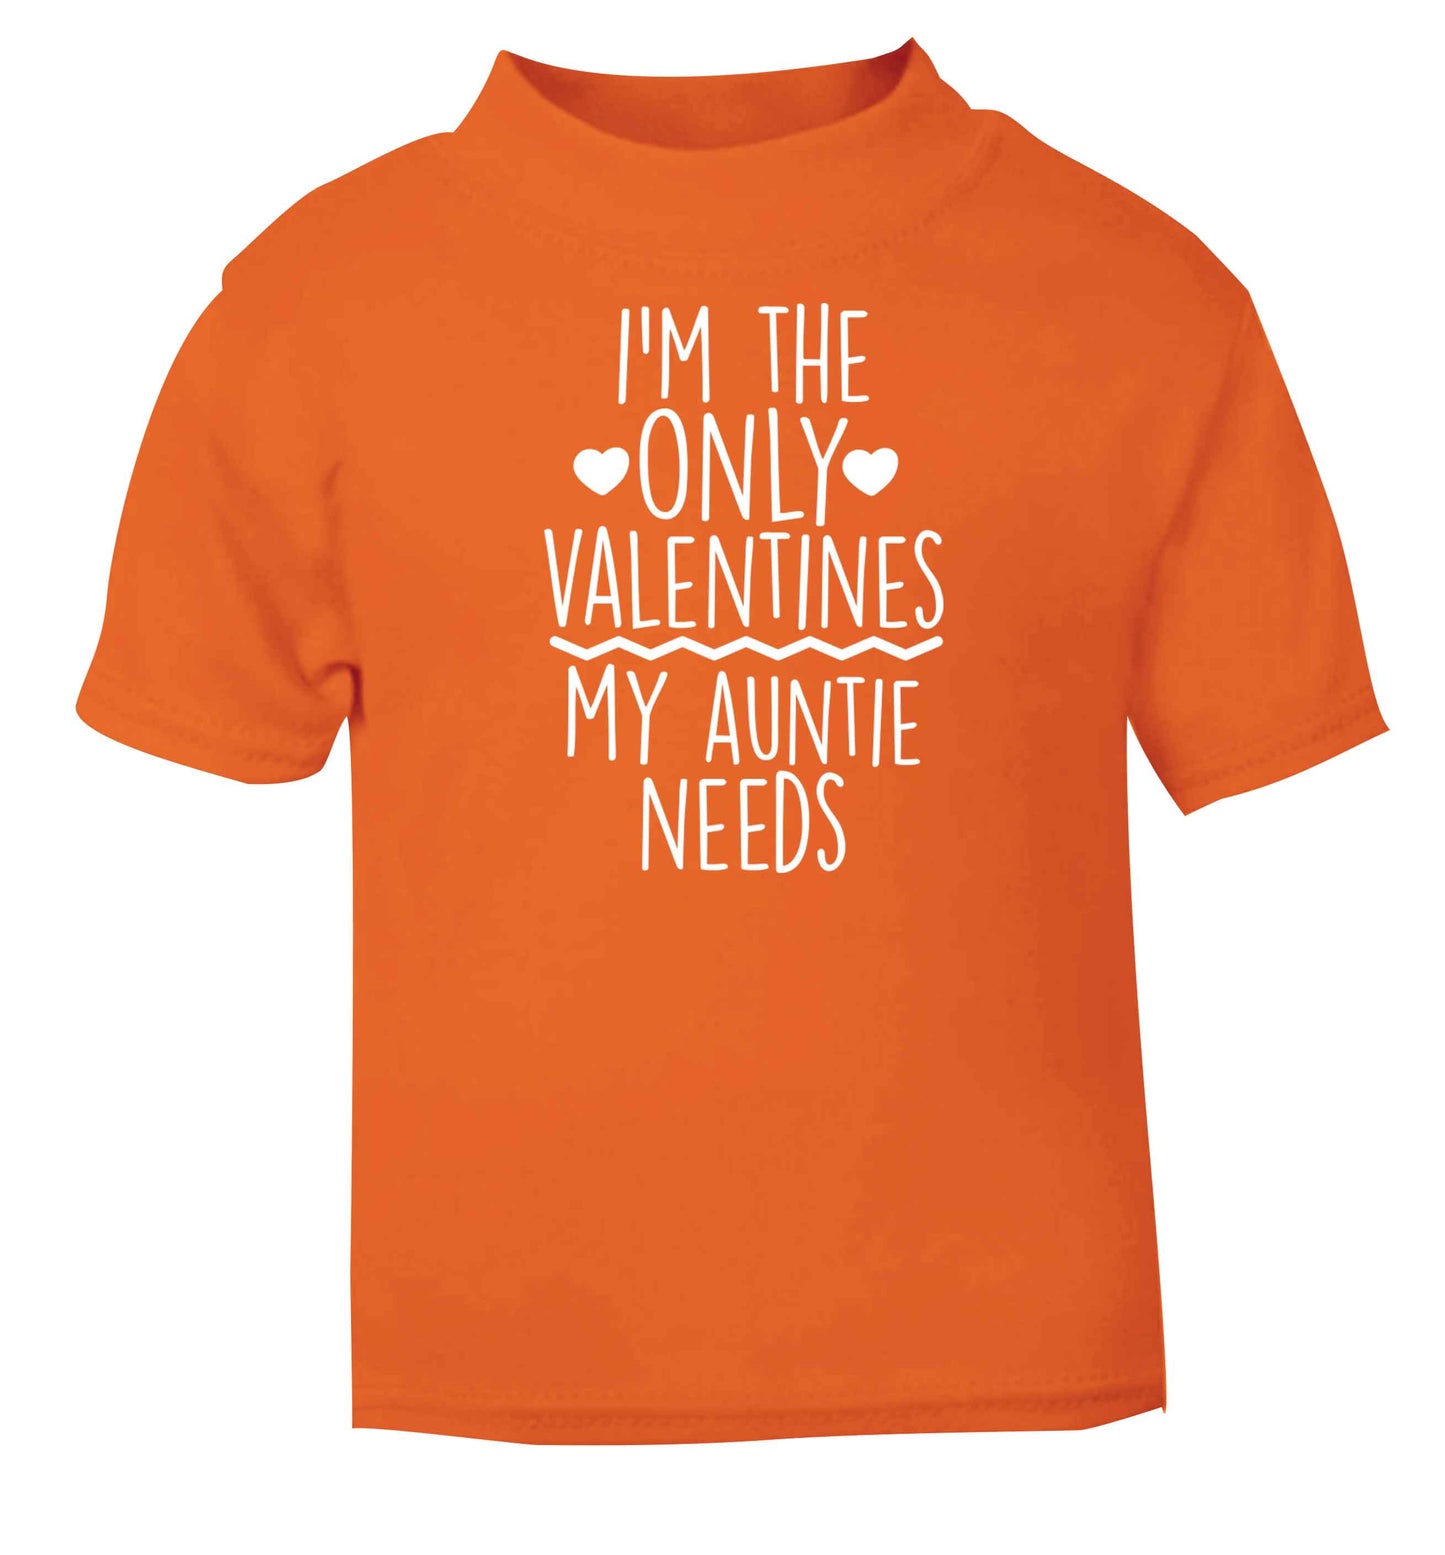 I'm the only valentines my auntie needs orange baby toddler Tshirt 2 Years